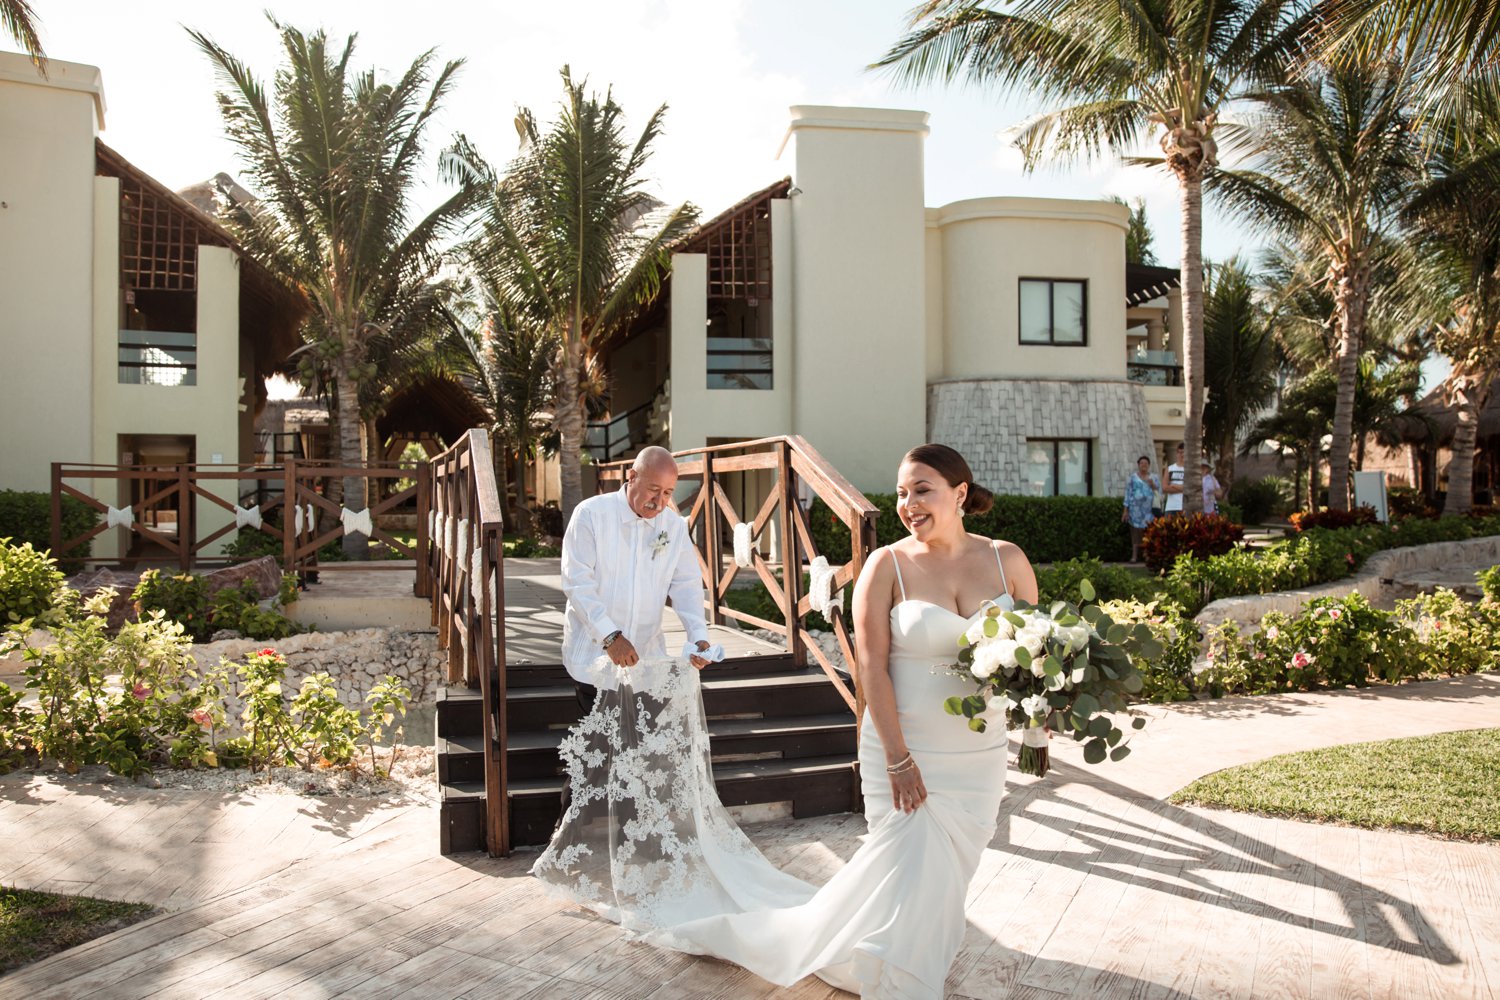  images by feliciathephotographer.com | destination wedding photographer | mexico | tropical | fiji | venue | azul beach resort | riviera maya | ceremony | palm trees | walking down the aisle | long lace train | father of the bride |